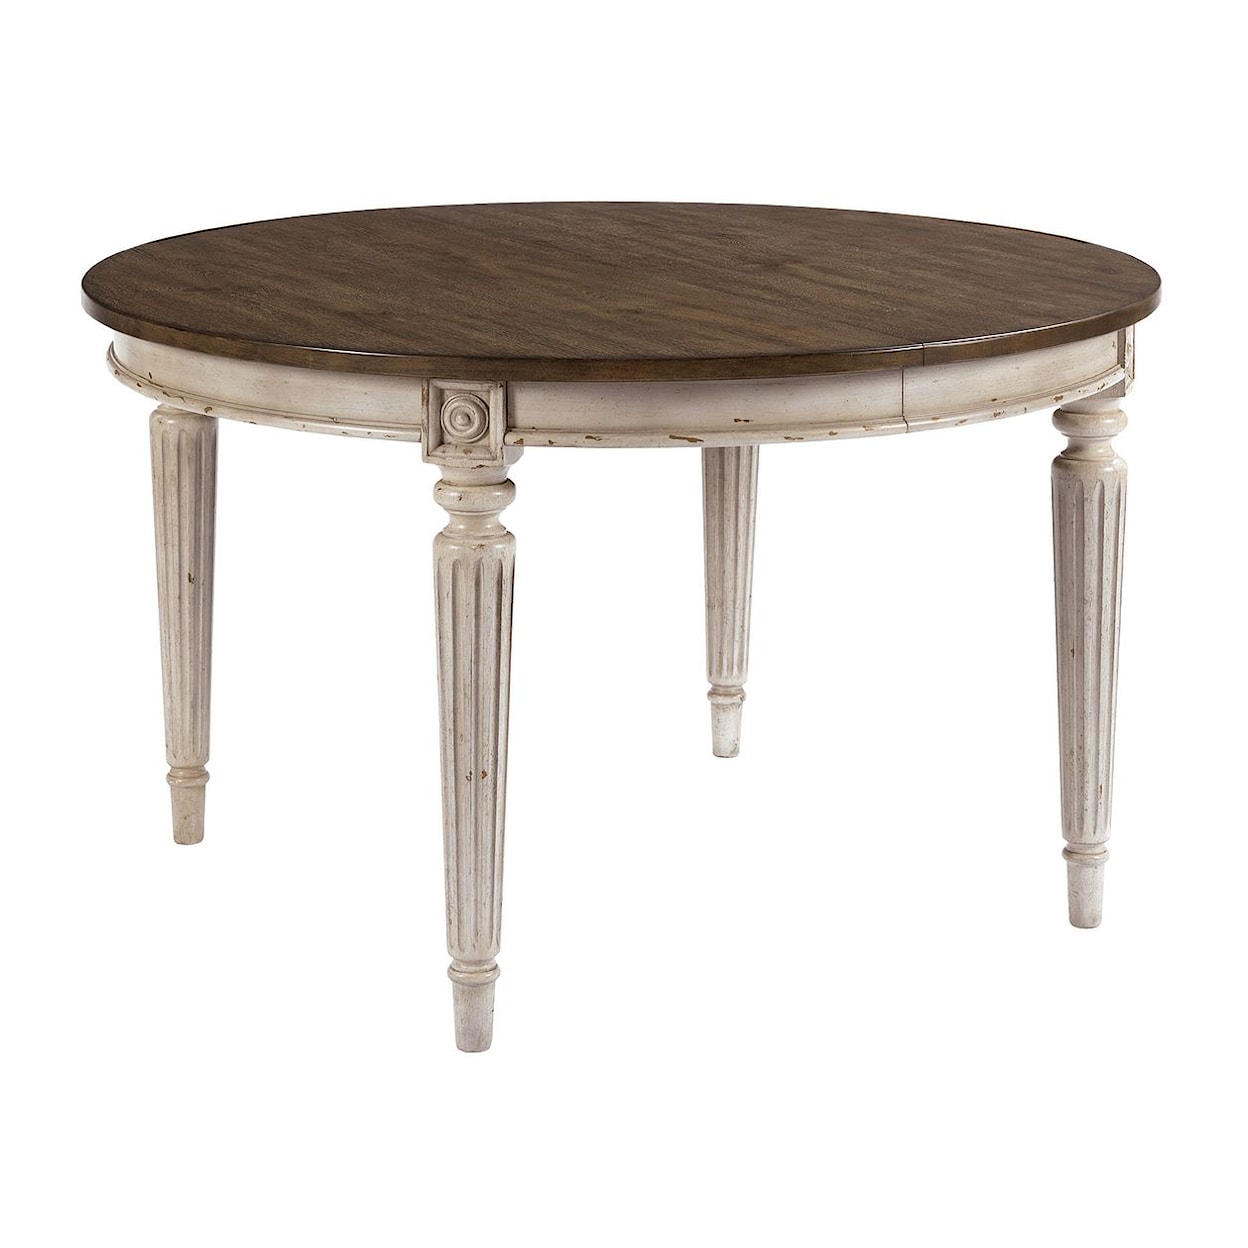 American Drew SOUTHBURY Round Dining Table